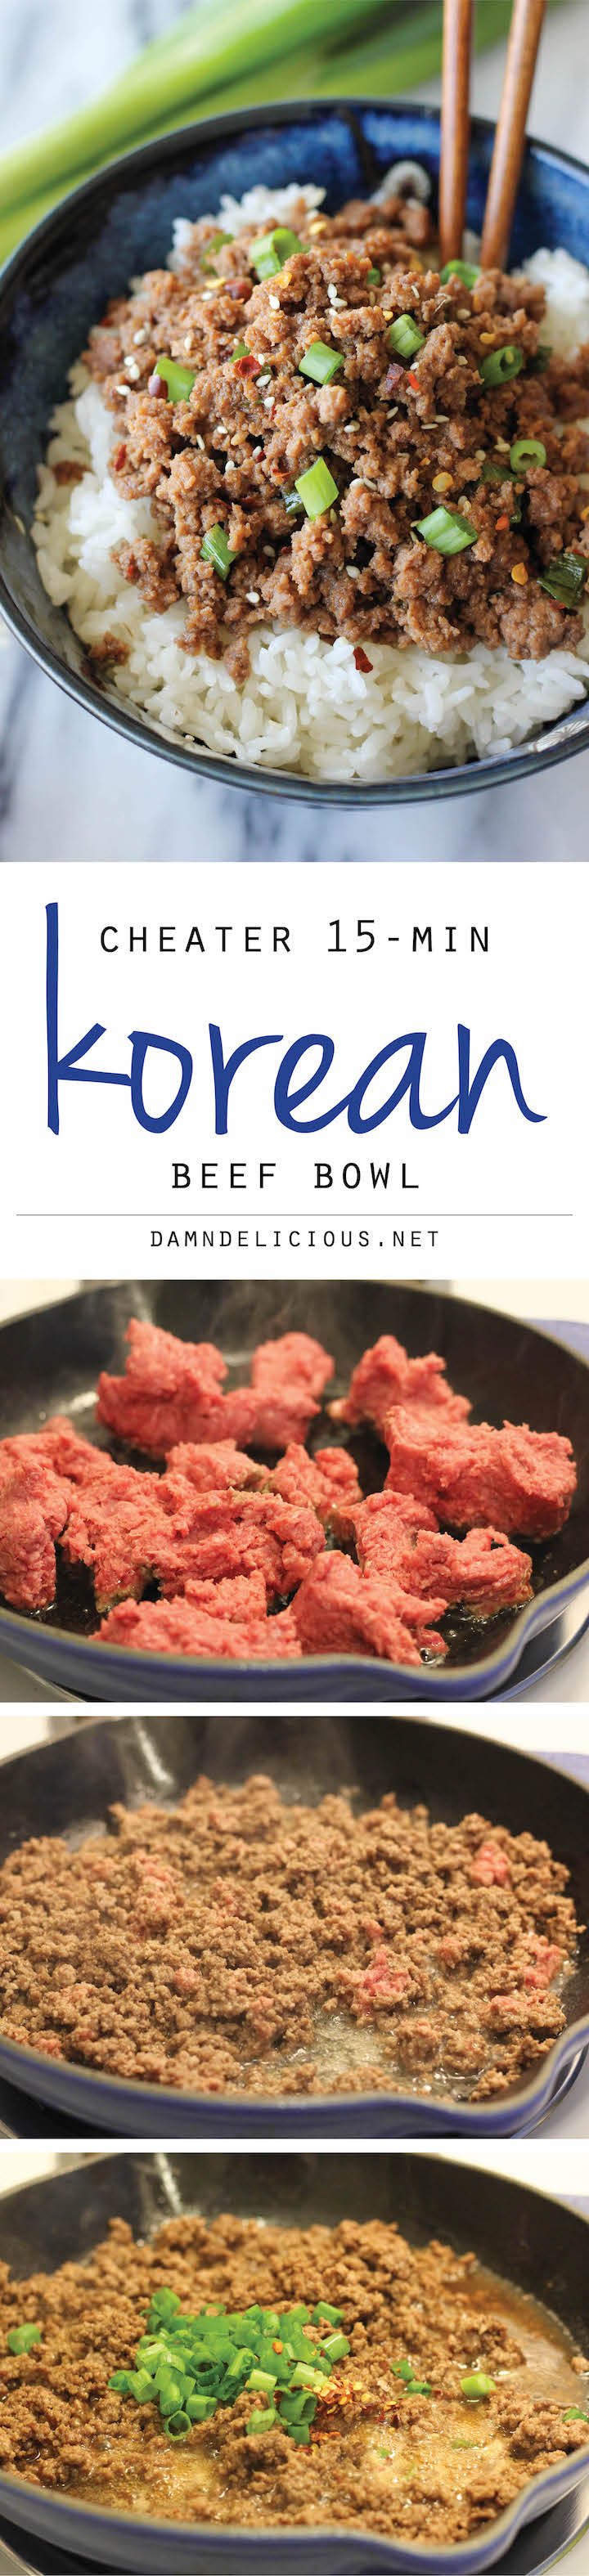 Korean Beef Bowl - Tastes like Korean BBQ and is on your dinner table in just 15 min from start to finish! Seriously. It doesn't get any easier than this!